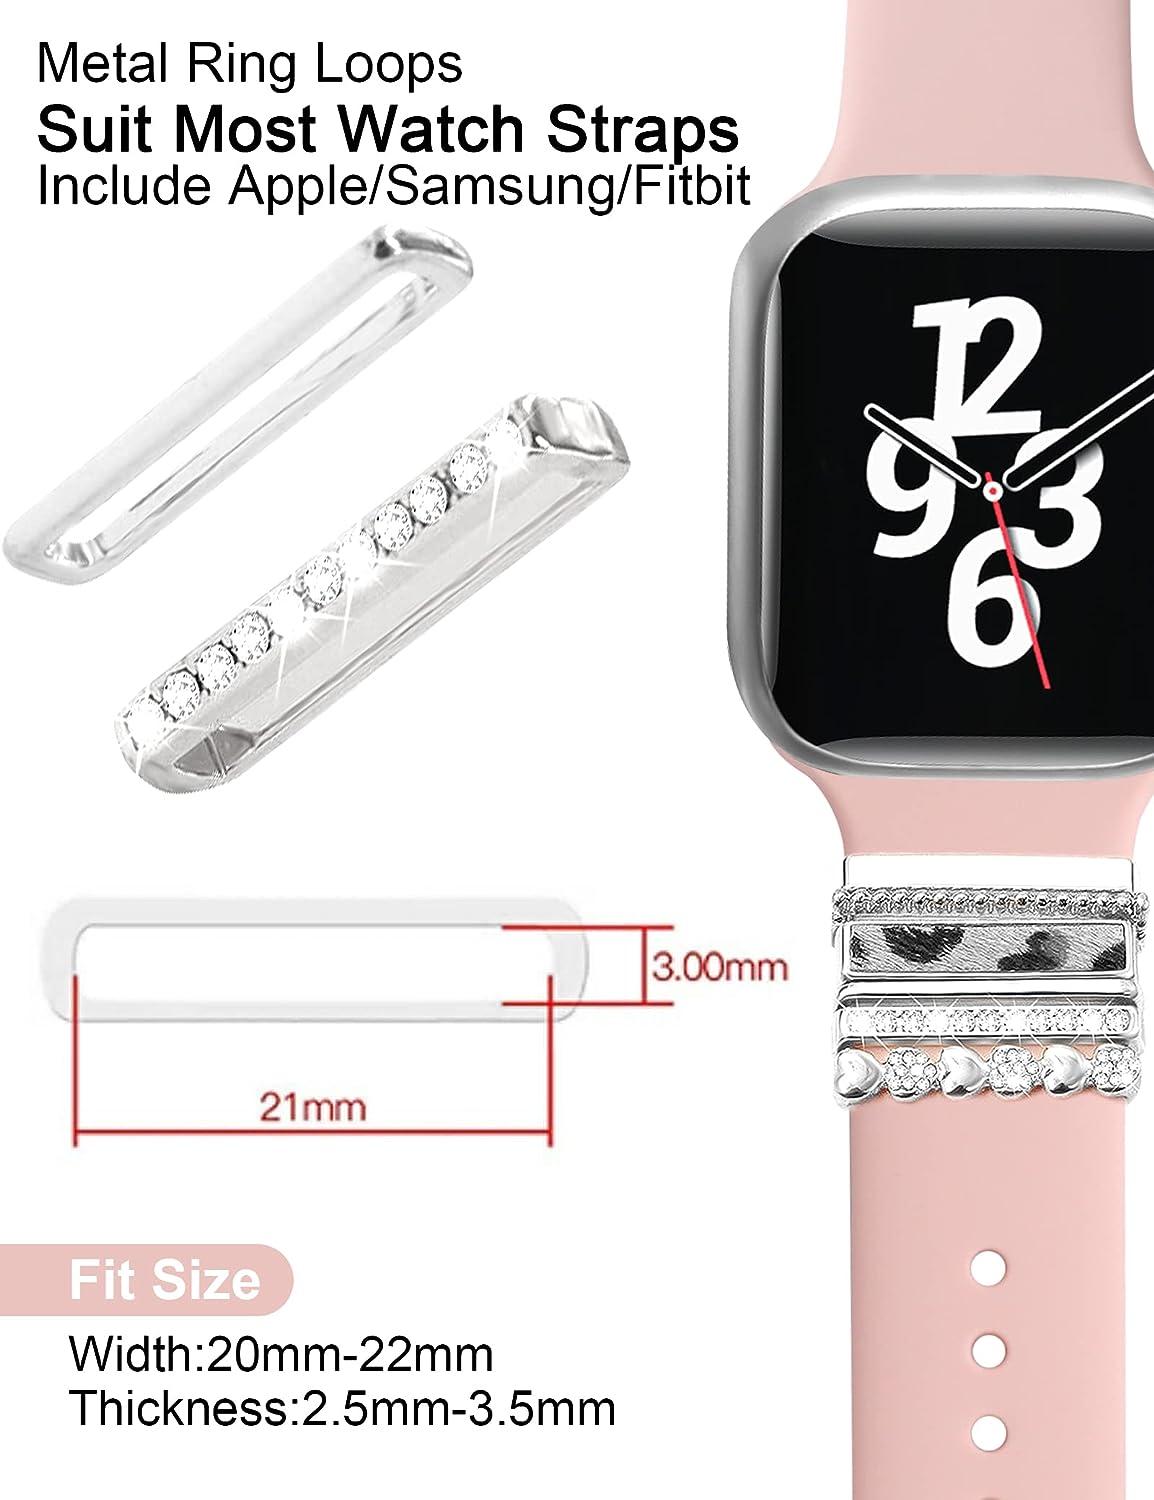 1 Set Metal Decorative Ring Loops for Apple Watch Series 7 / 6 /5